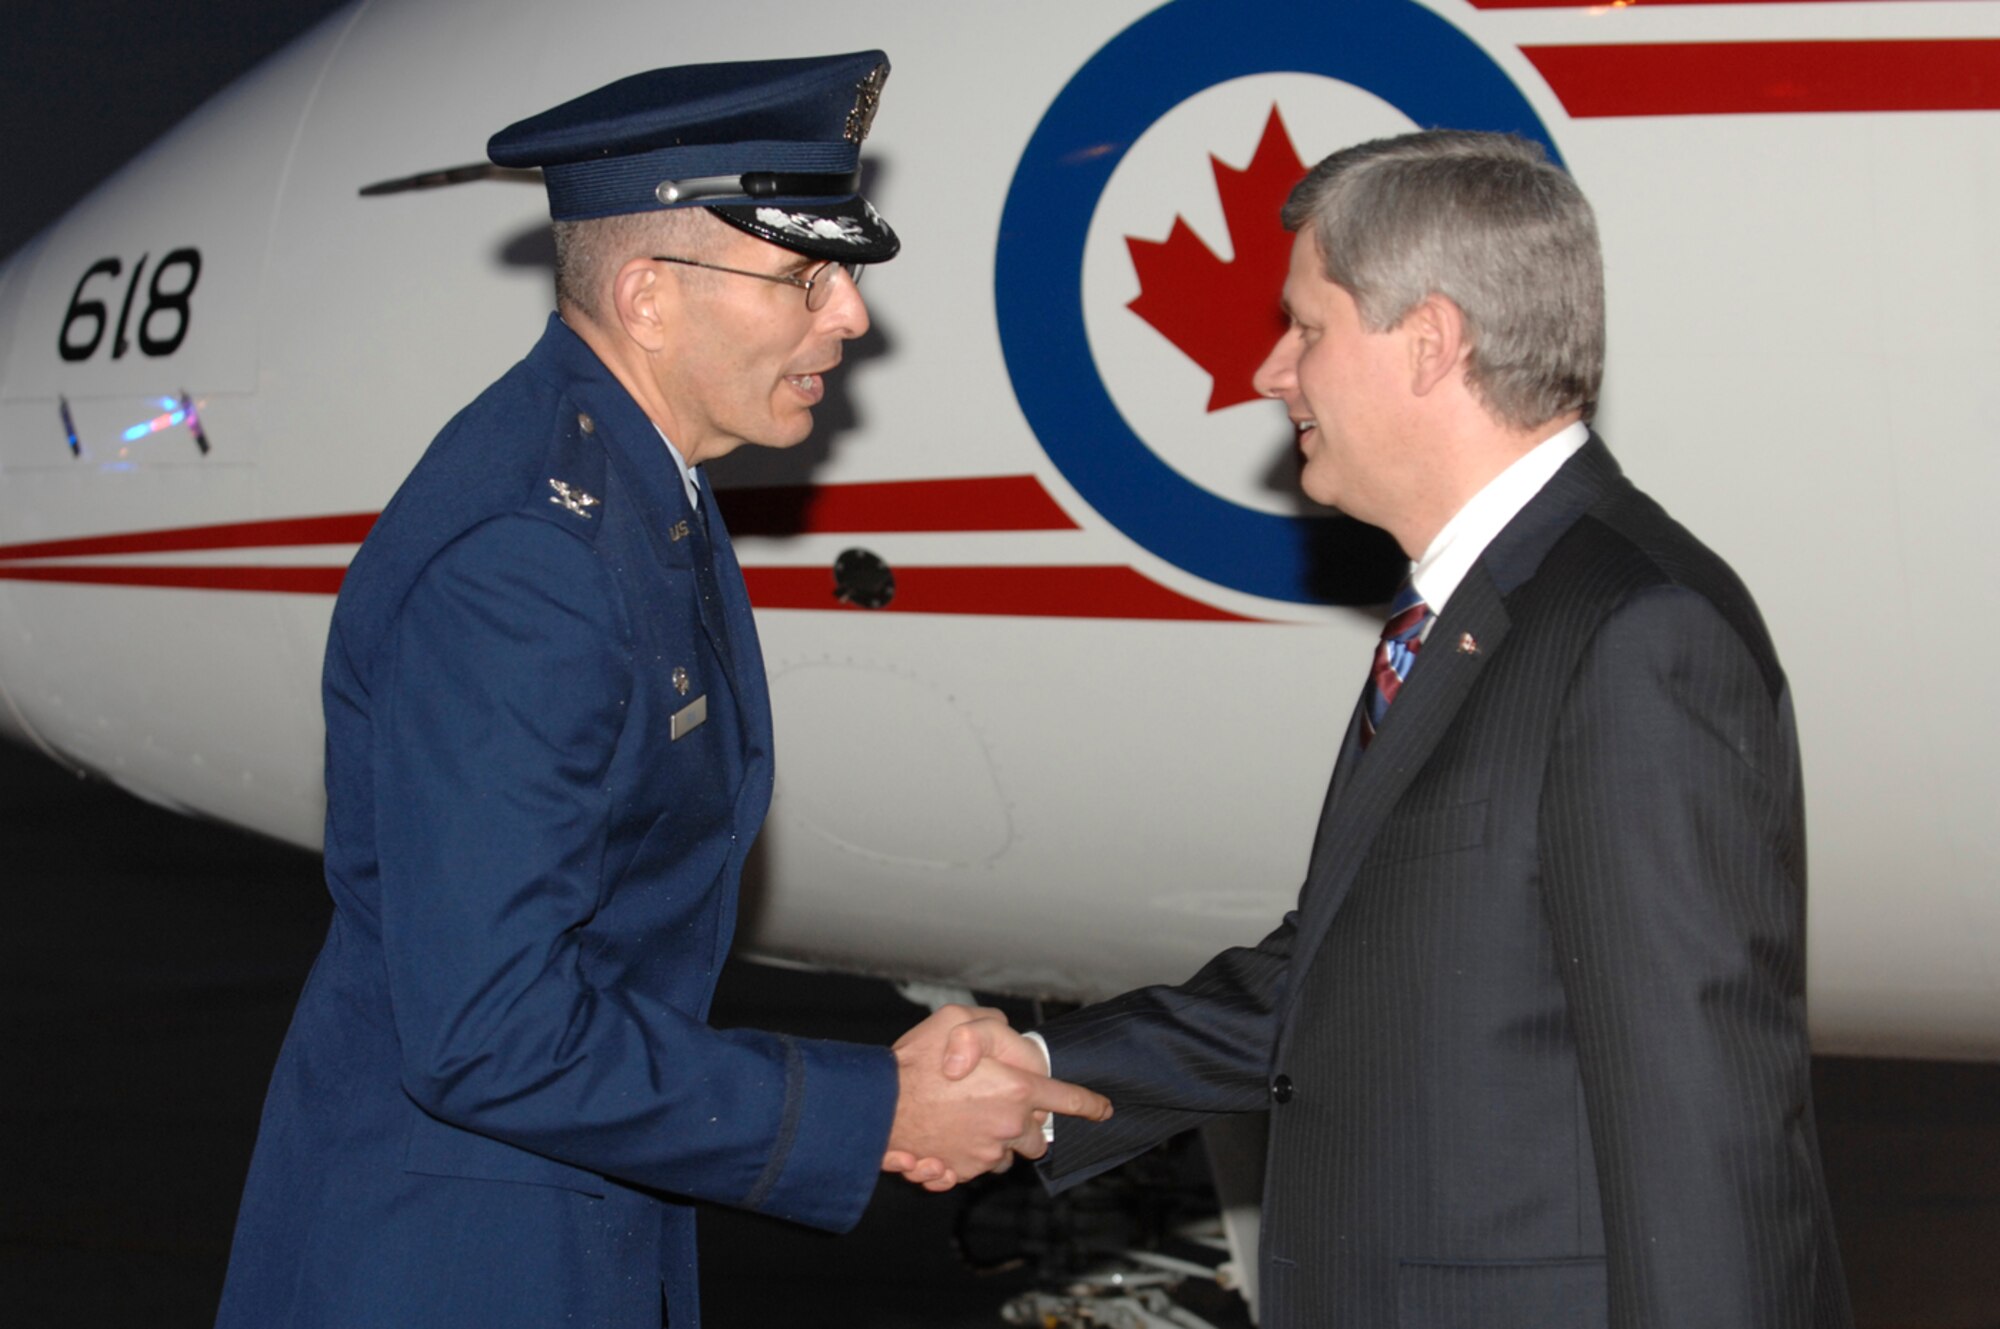 Colonel Clair Gilk, 316th Operations Group commander, greets Canadian Prime Minister Stephen Harper  at Andrews Air Force Base, Md., Nov. 14, 2008, for the two-day G20 Summit at the White House in Washington. The summit, hosted by U.S. President George W. Bush, will bring together world leaders to discuss the increasing global financial crisis, its causes and efforts to resolve it. (U.S. Air Force photo by Tech. Sgt. Craig Clapper)